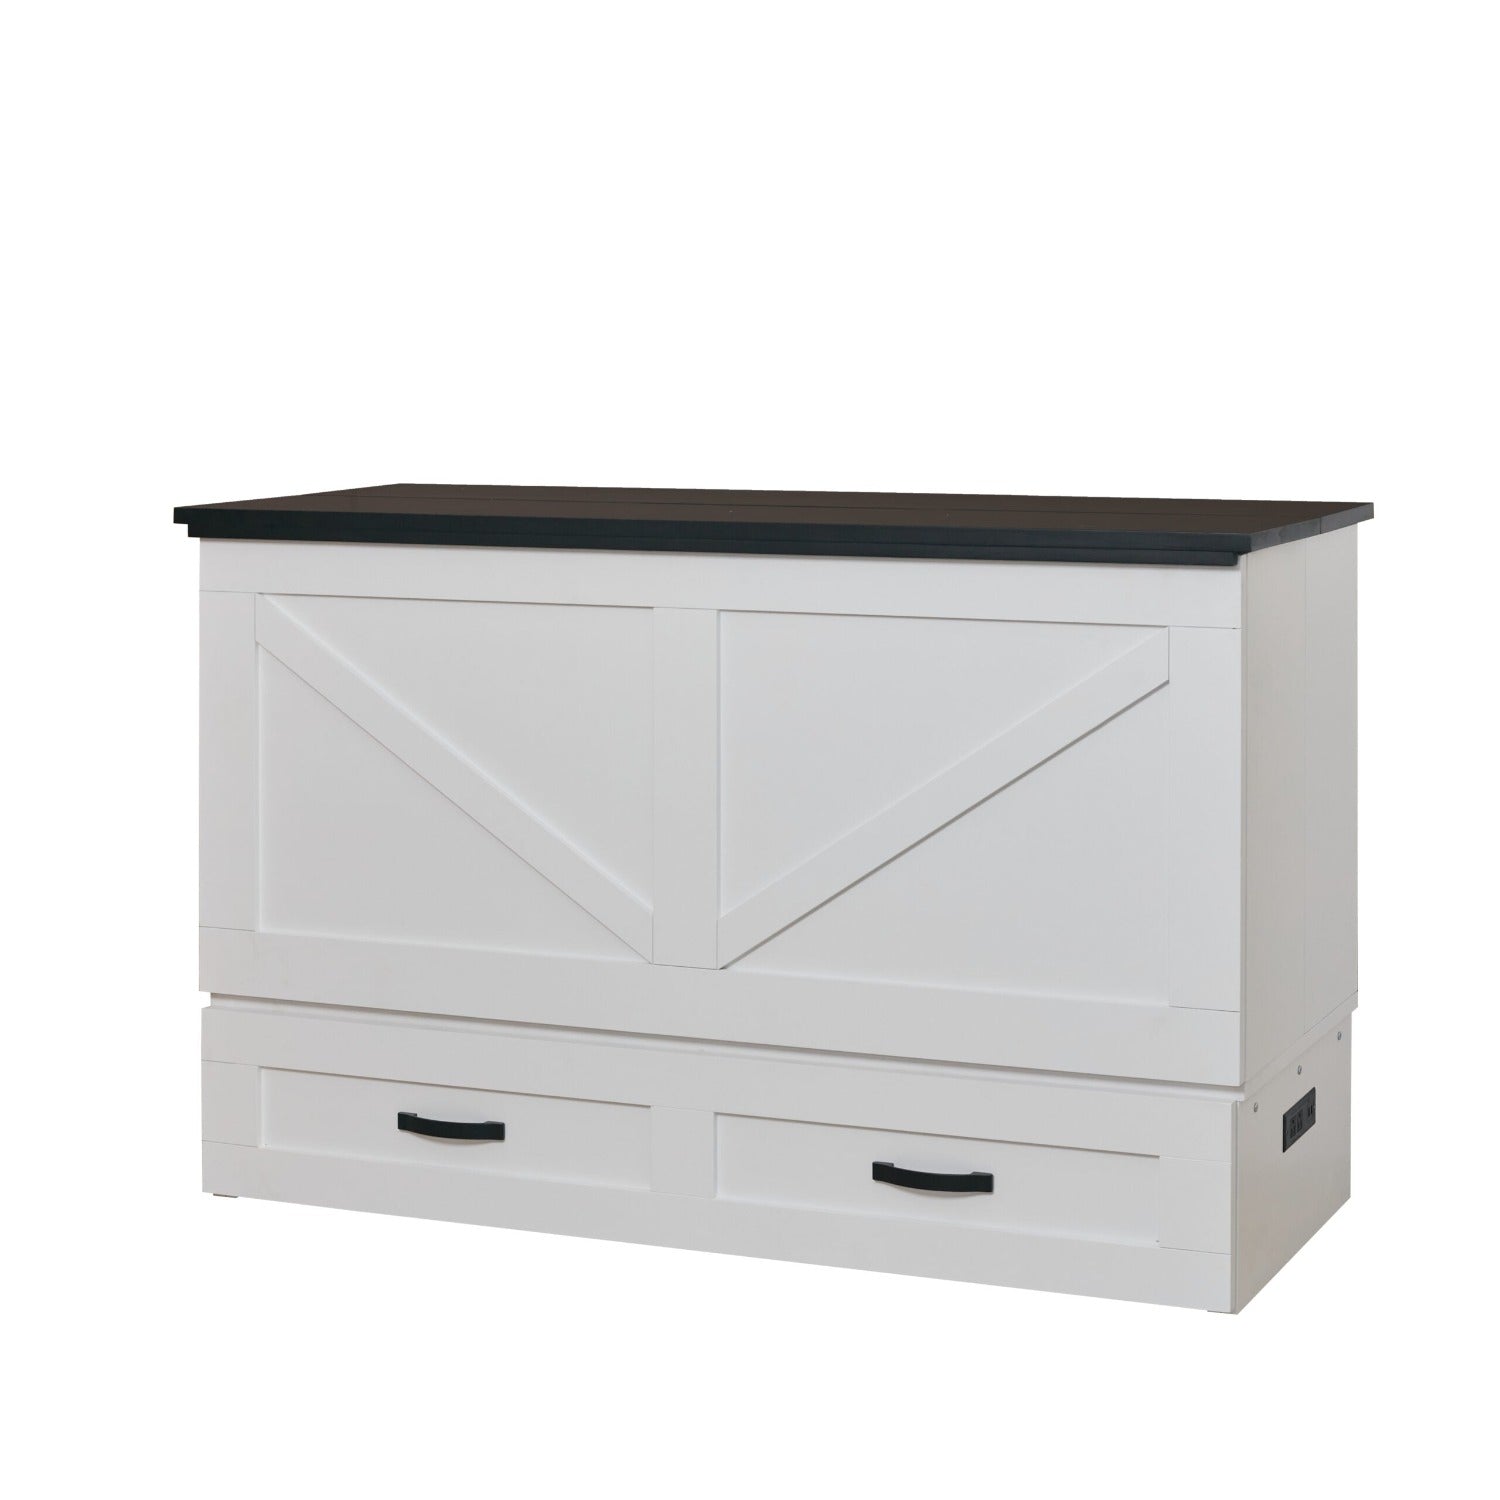 Cottage Cabinet Bed in Two Tone White/Black at Luxurious Beds and Linens.